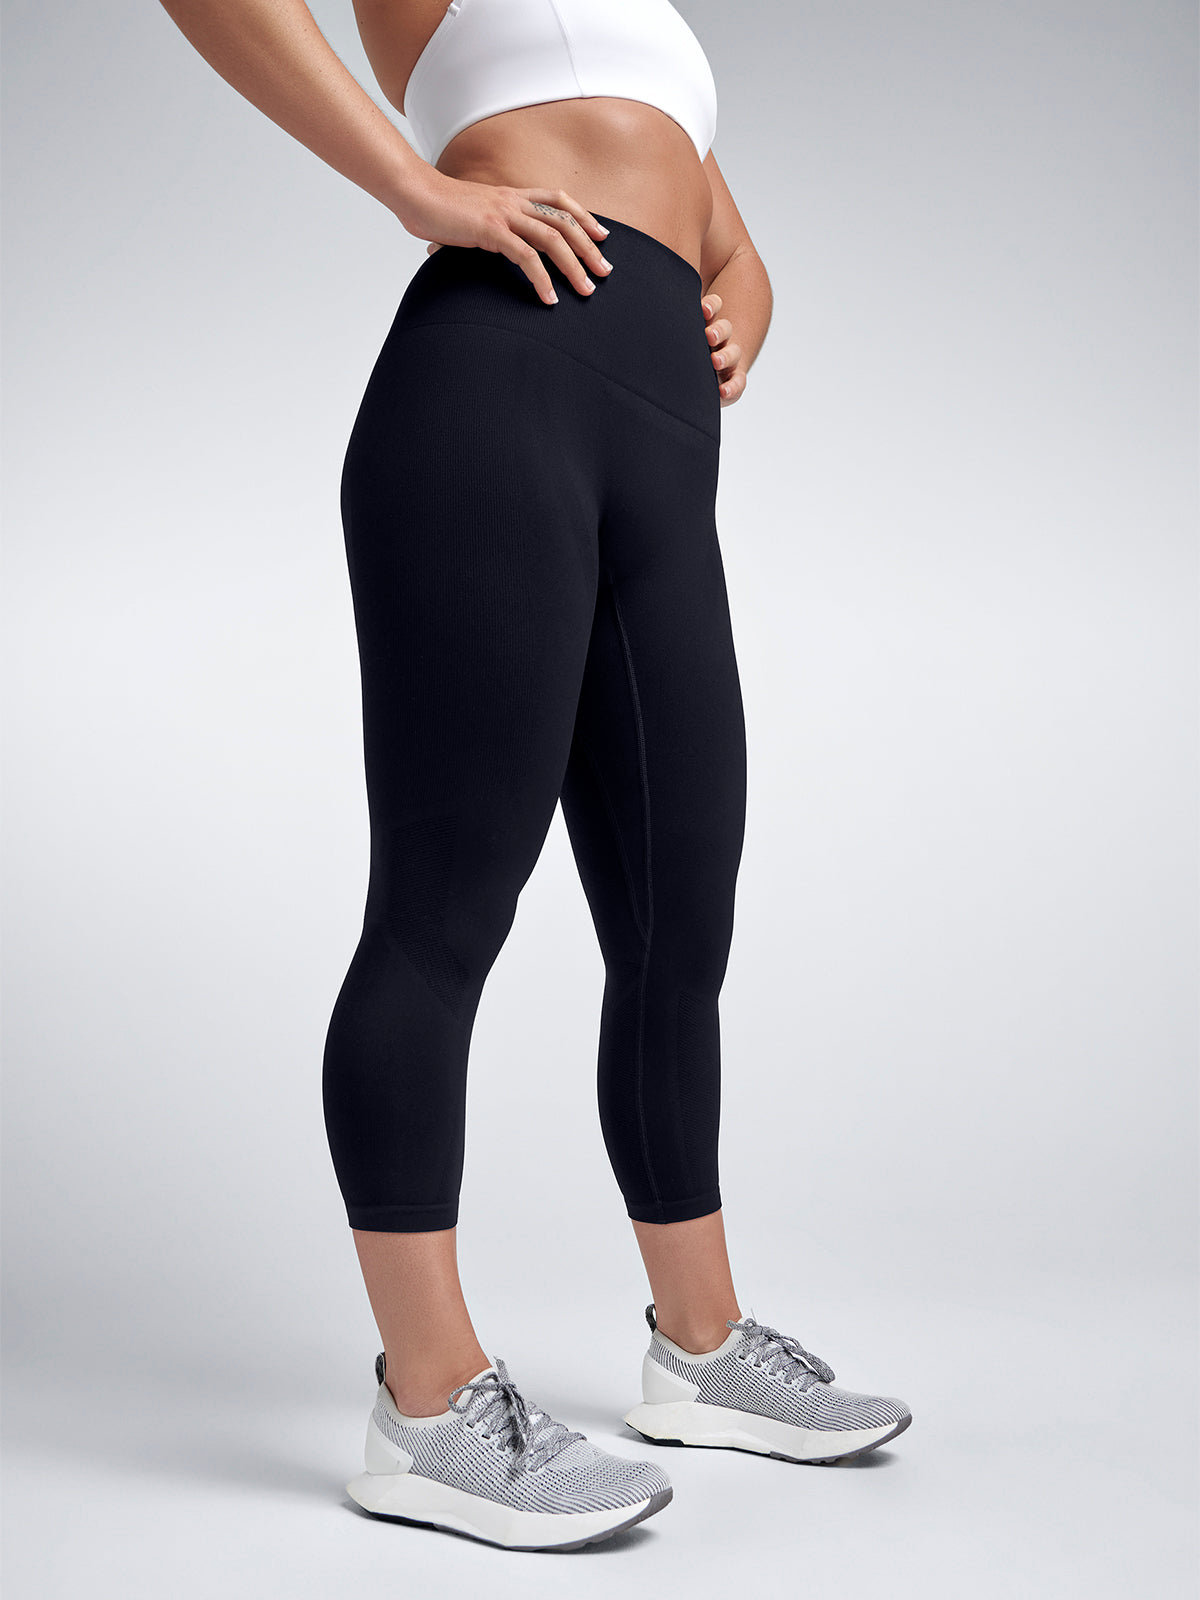 CnlanRow Womens Black Sport Leggings Pants Ultra Stretch Knit Soft Ankle  Length Regular : Buy Online at Best Price in KSA - Souq is now :  Fashion